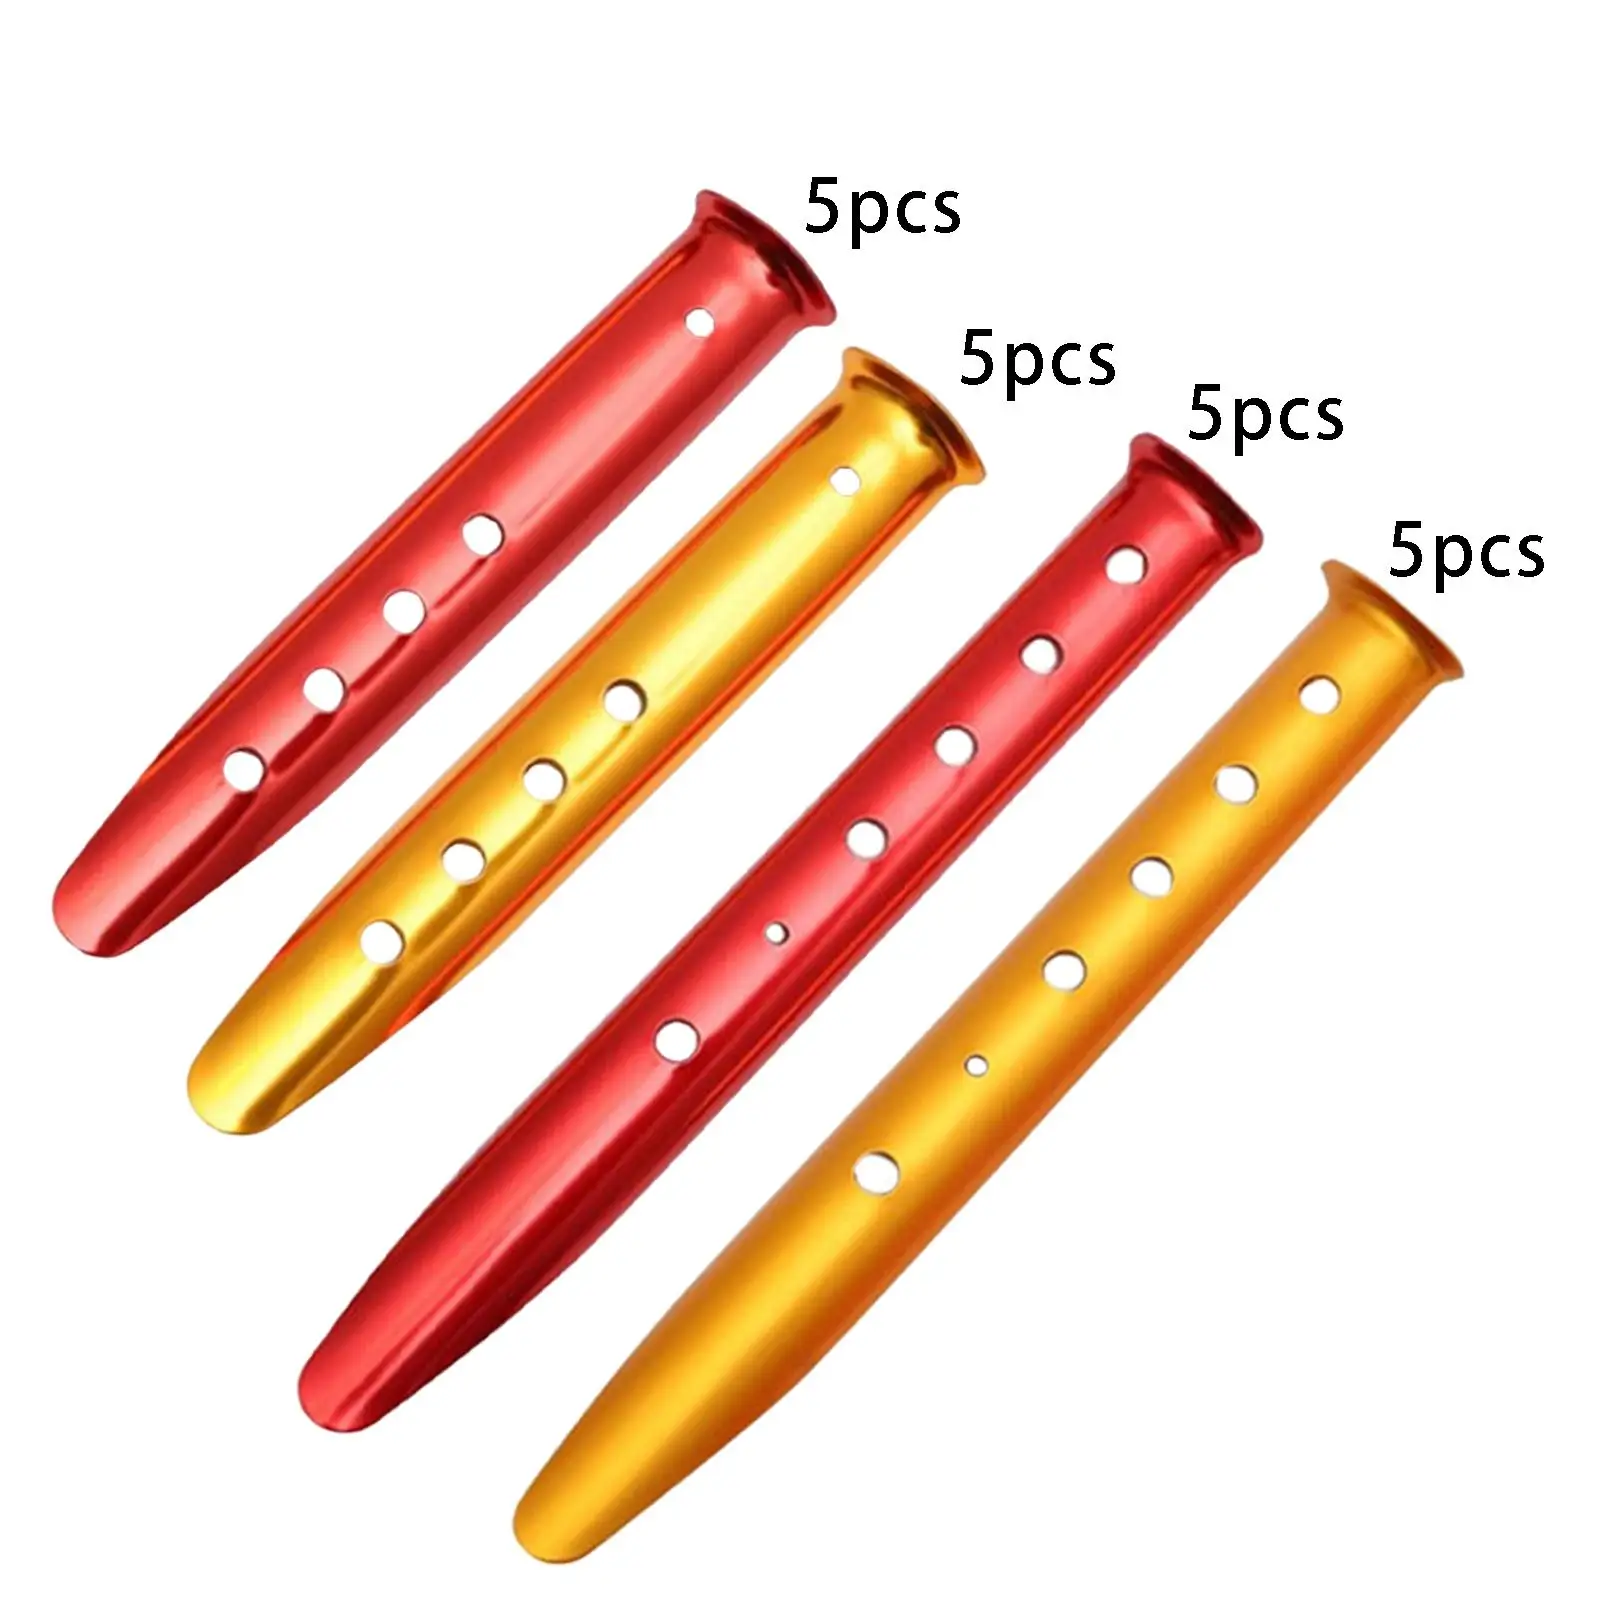 5Pcs Tent Stakes Pegs Ground Nails Tent Shaped for